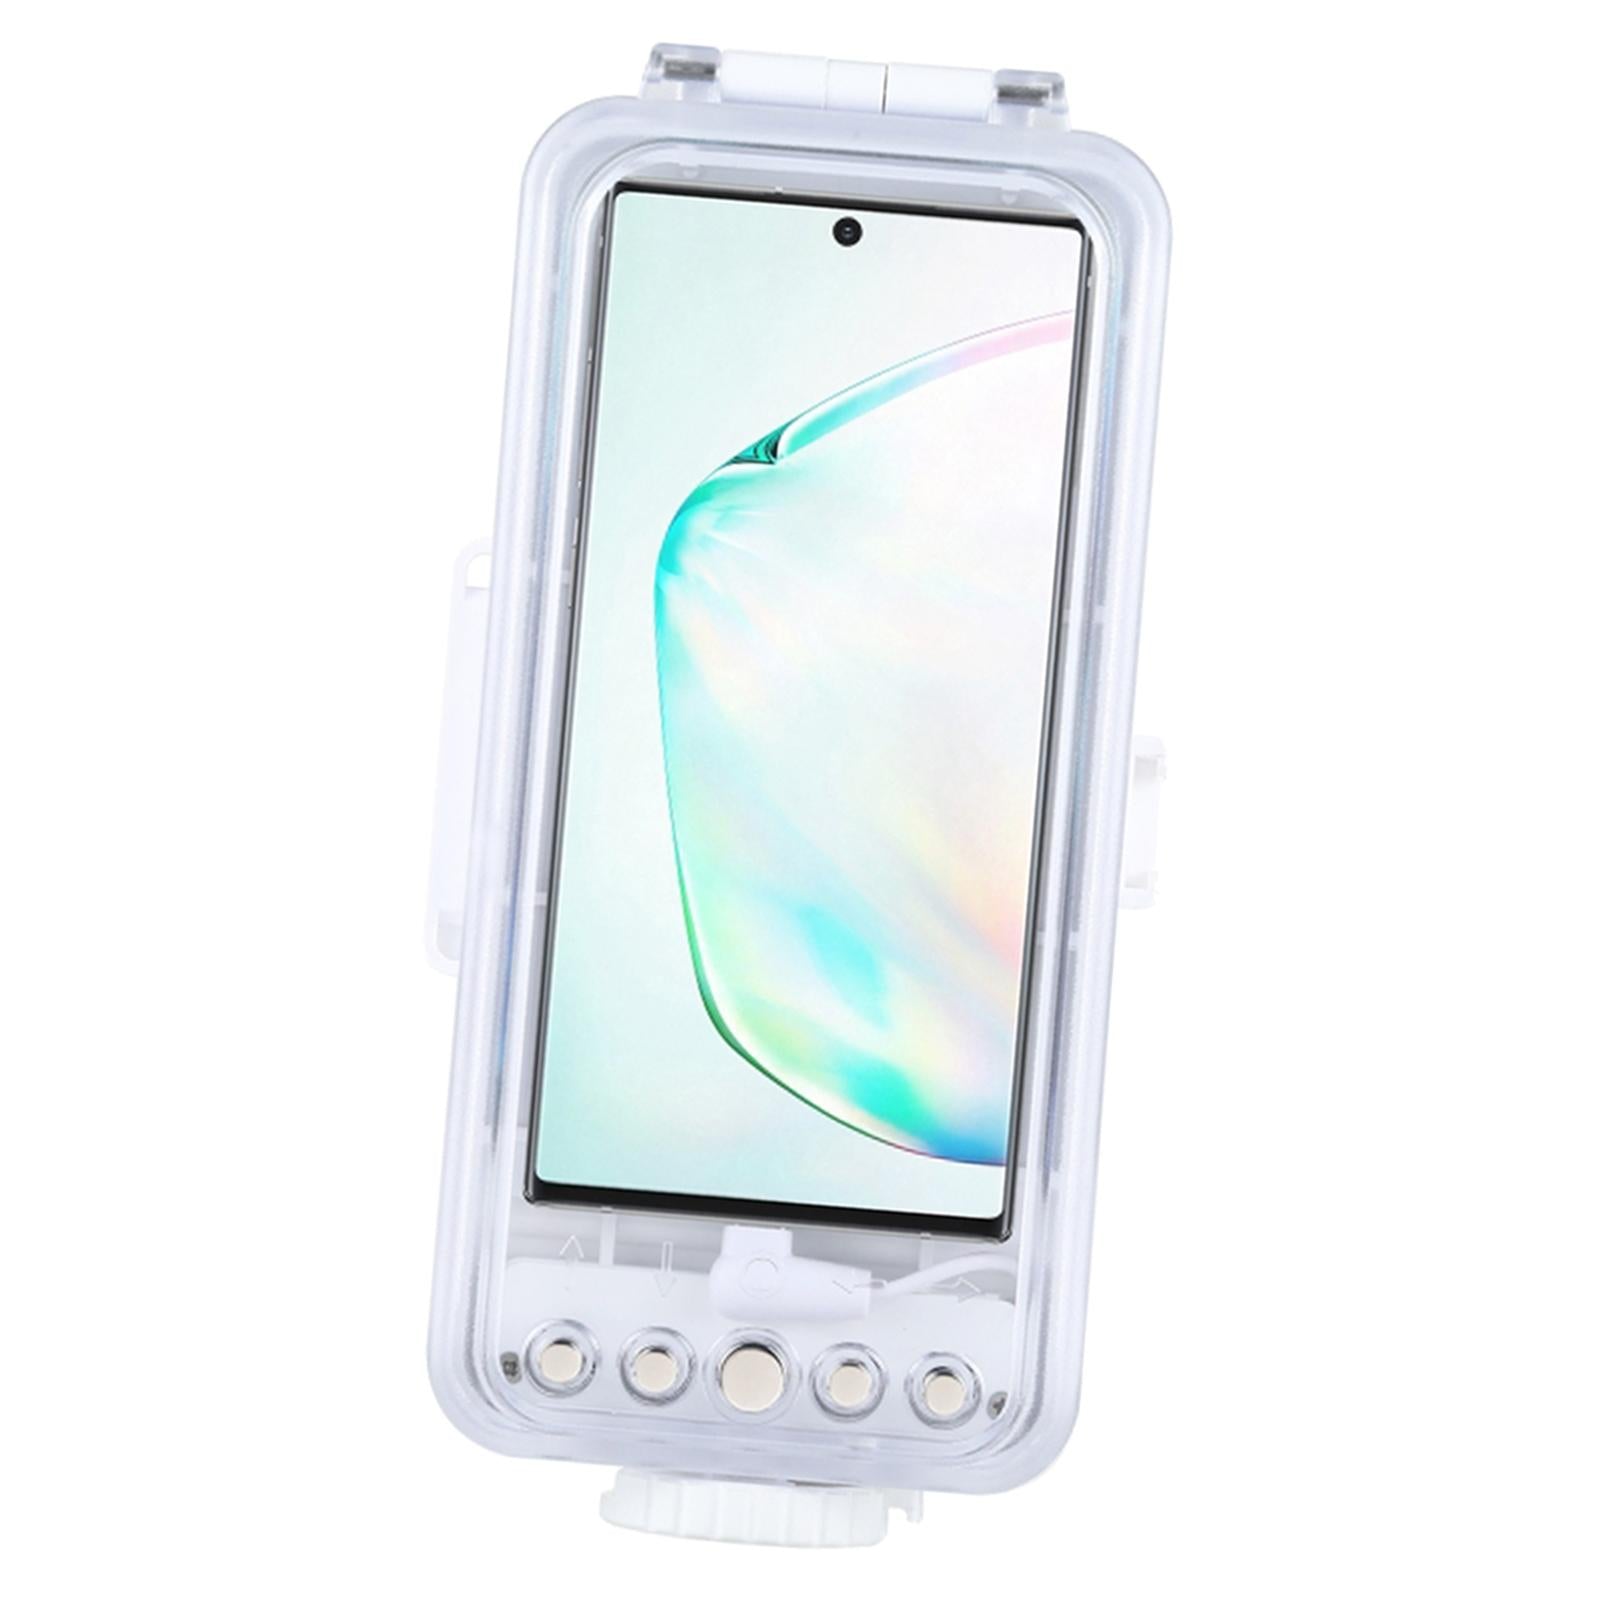 Waterproof Diving Cover Underwater Case for Android OTG Smartphones Clear